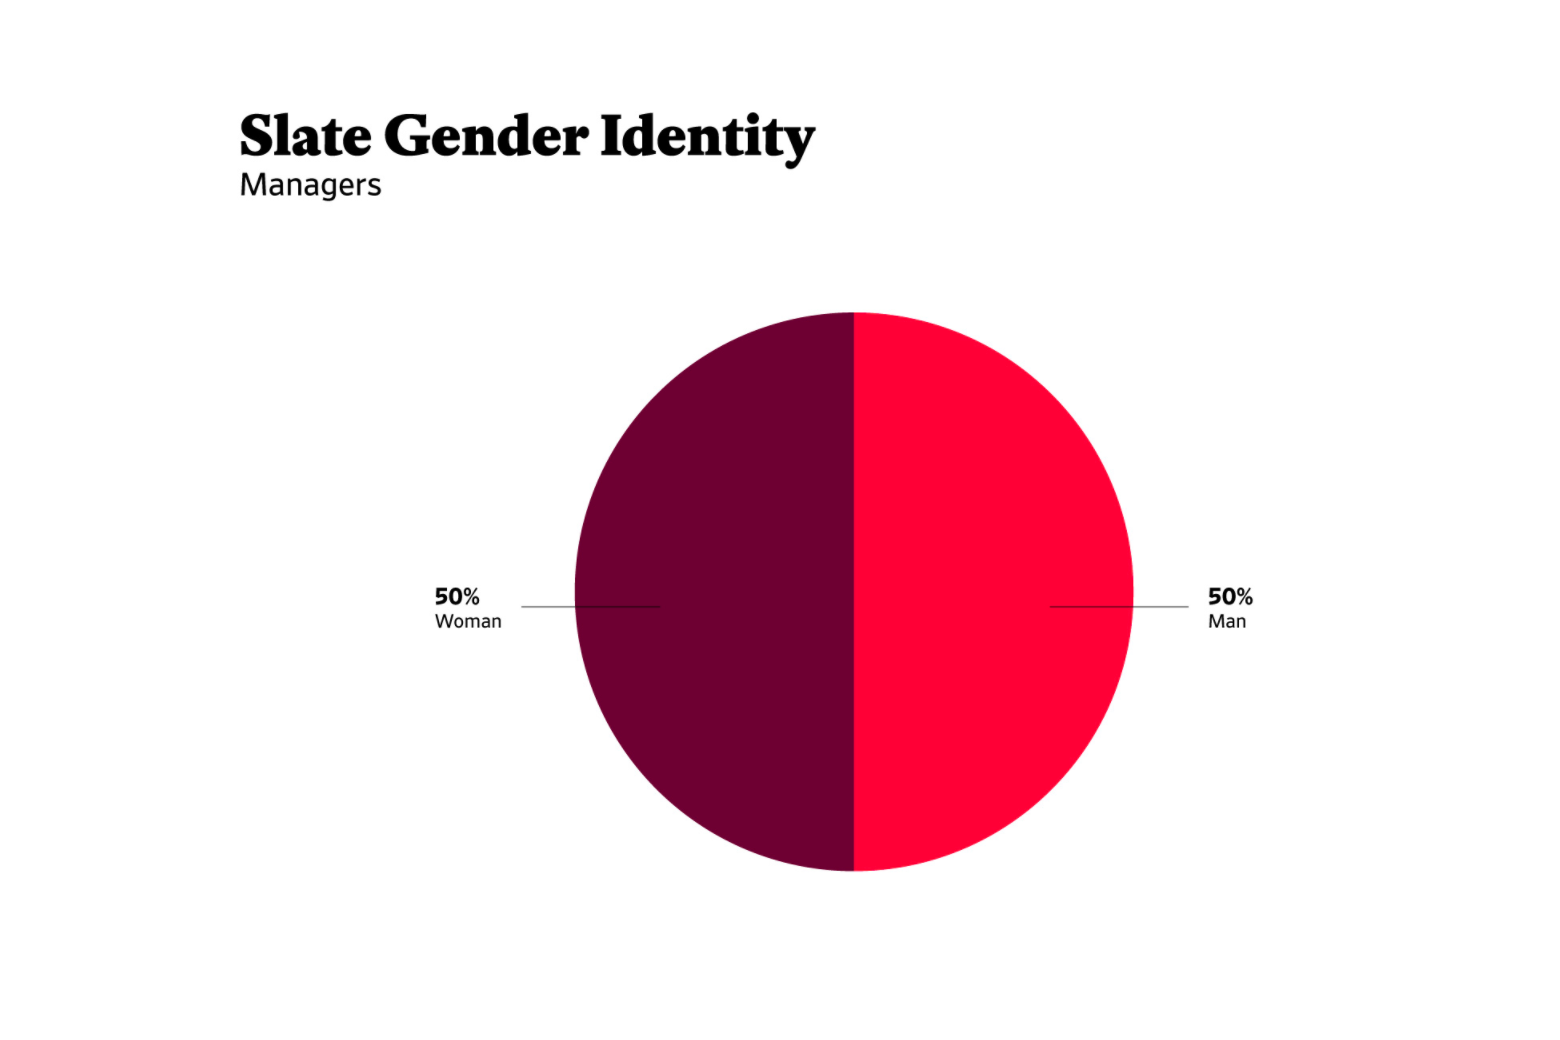 A pie chart showing gender identity of Slate managers.